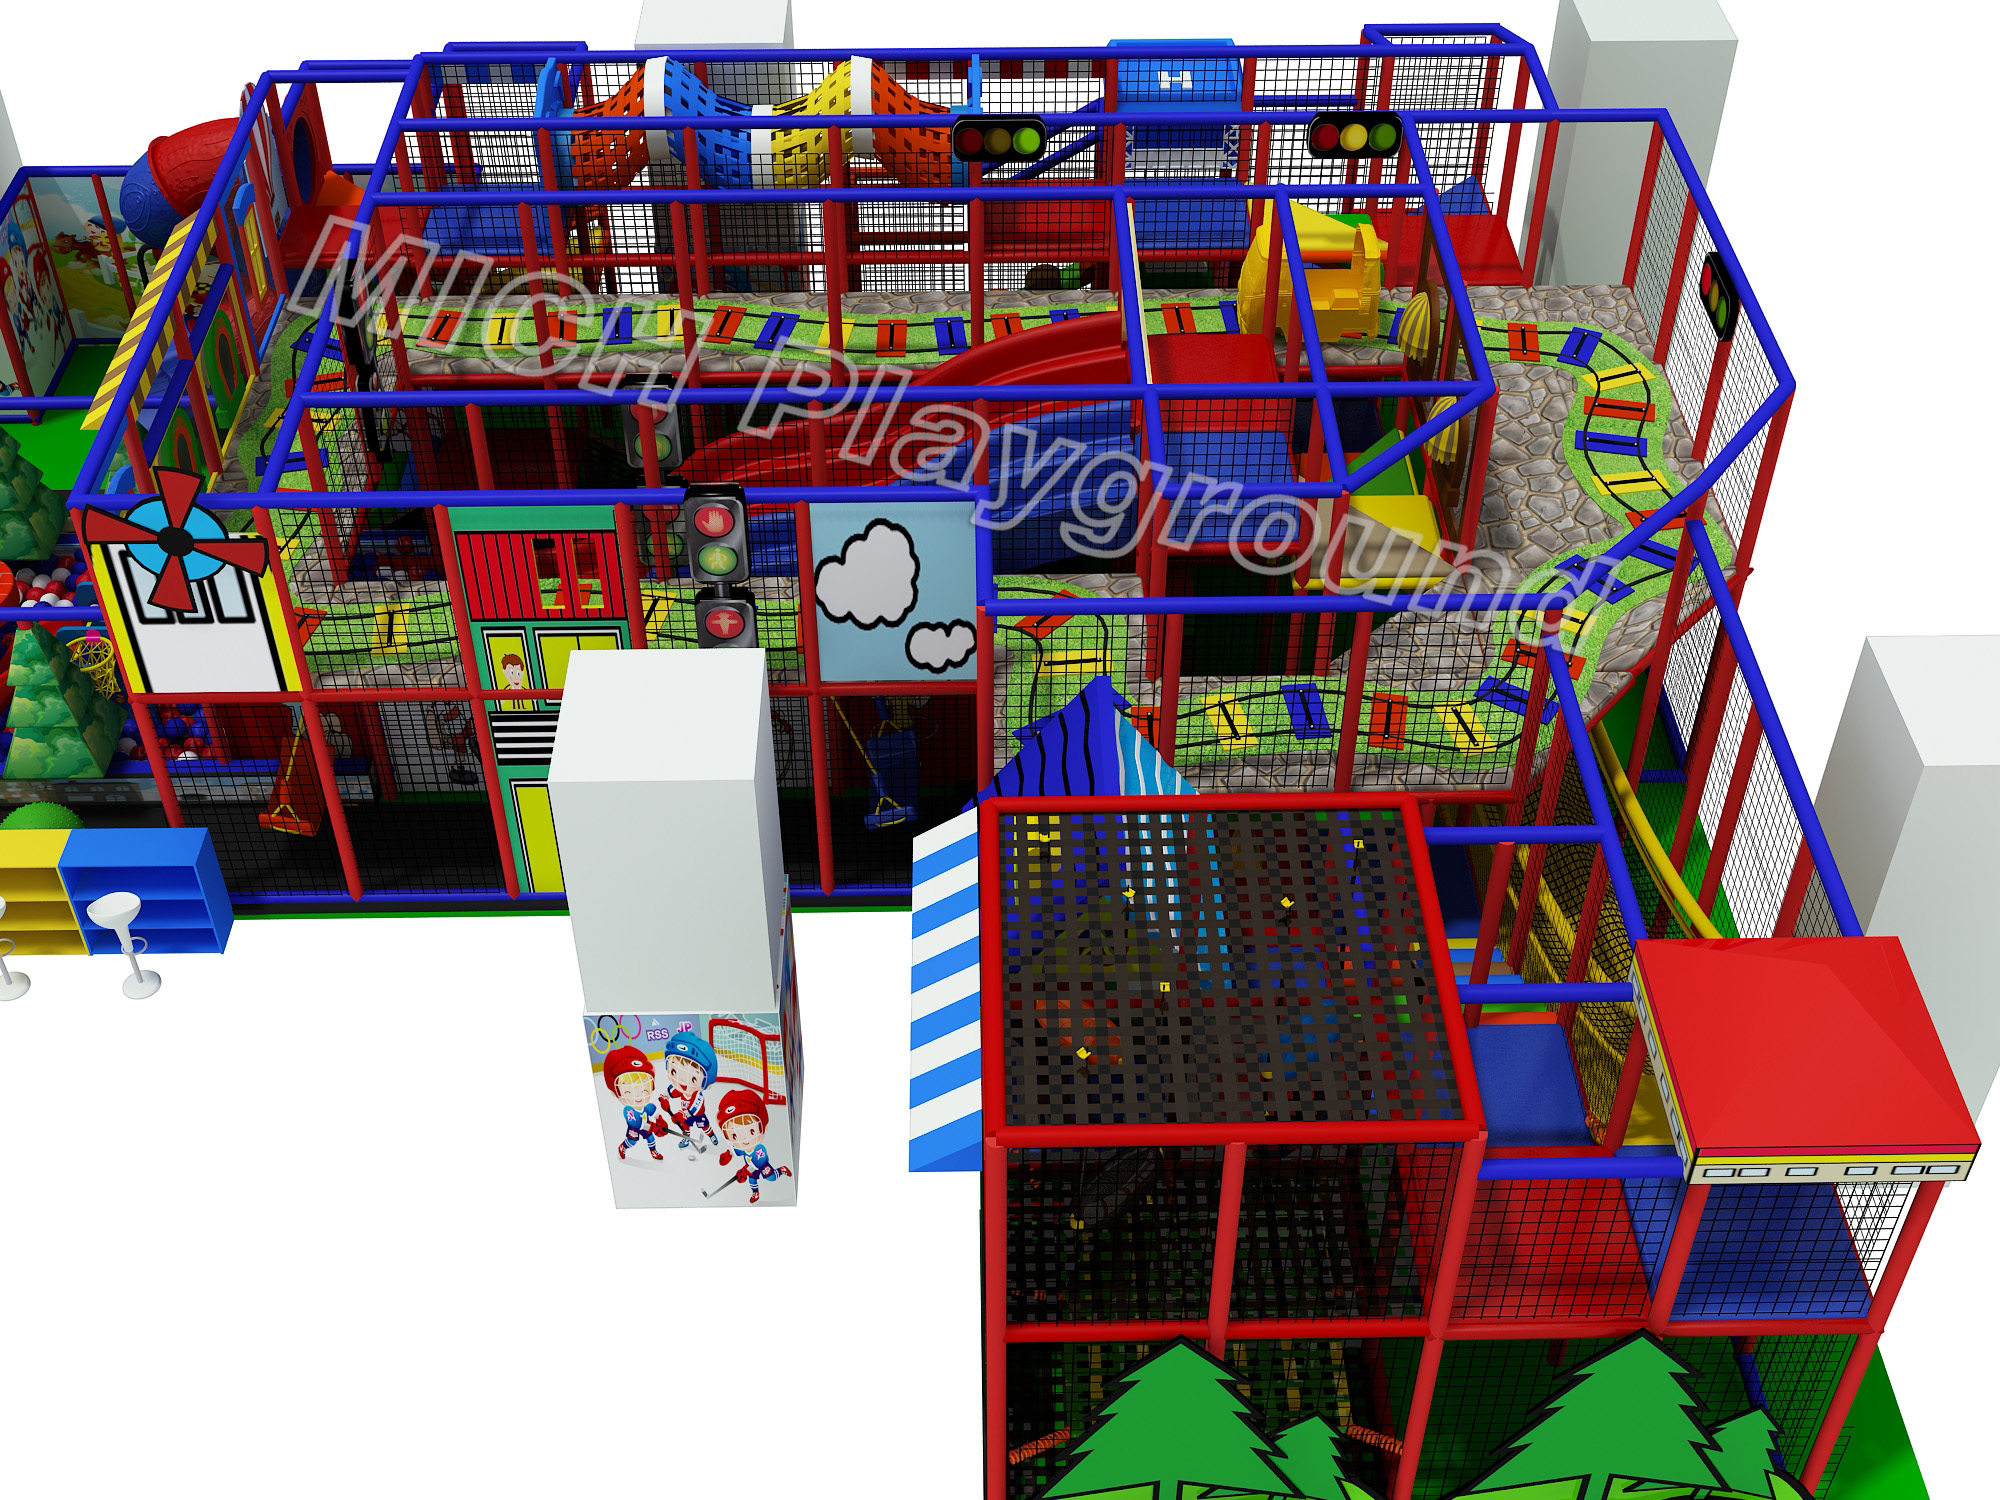 Sports Theme Kids Indoor Play Park